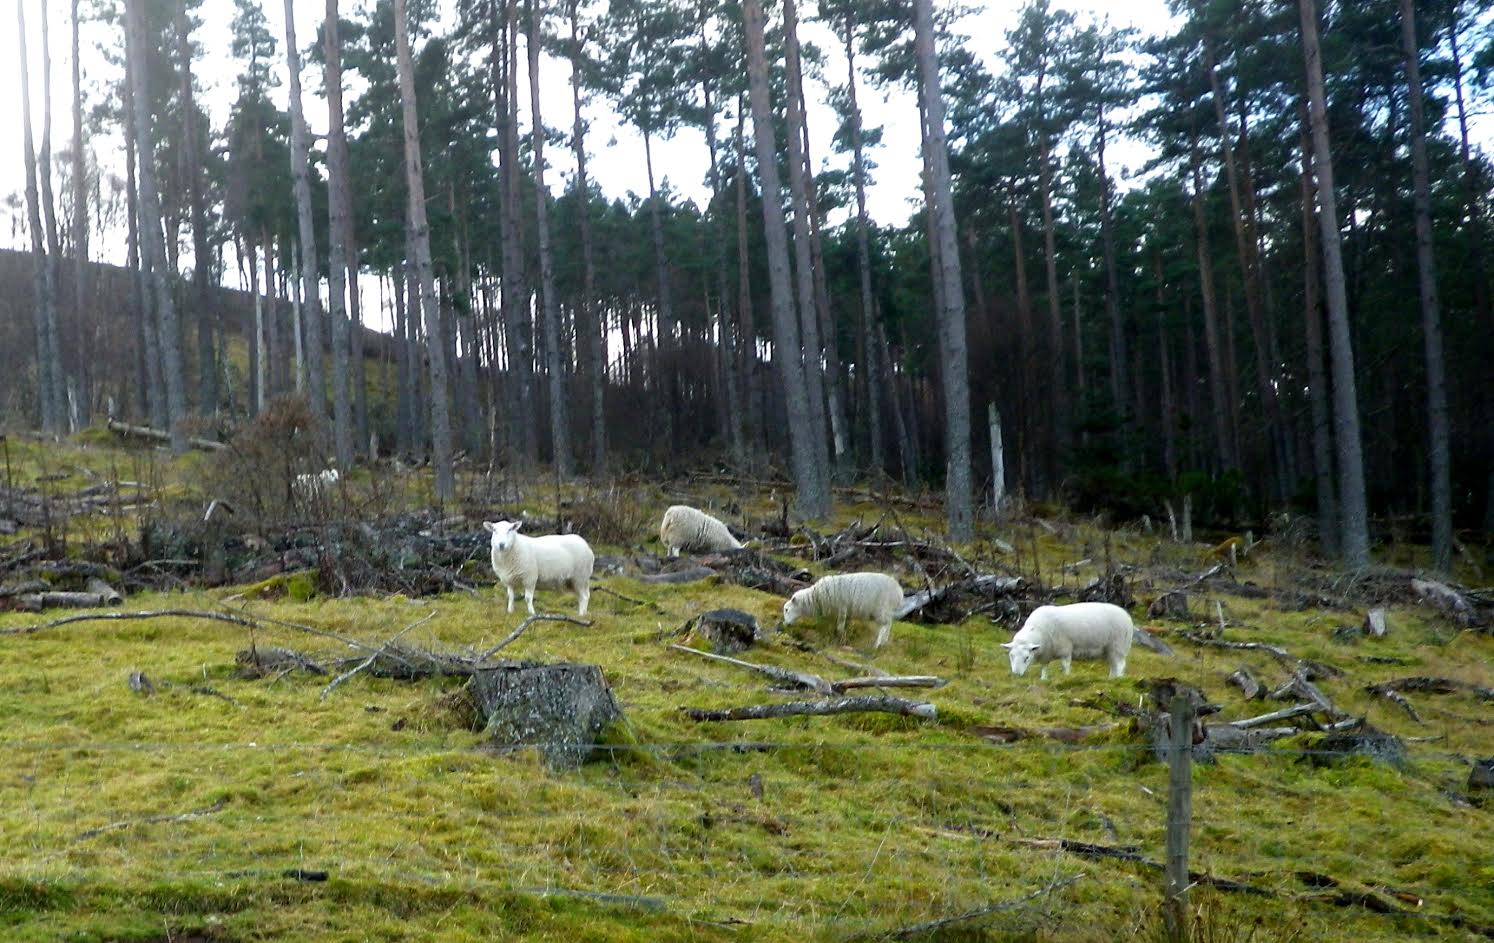 Open dialogue the key to managing stray sheep, Forest Enterprise Scotland says